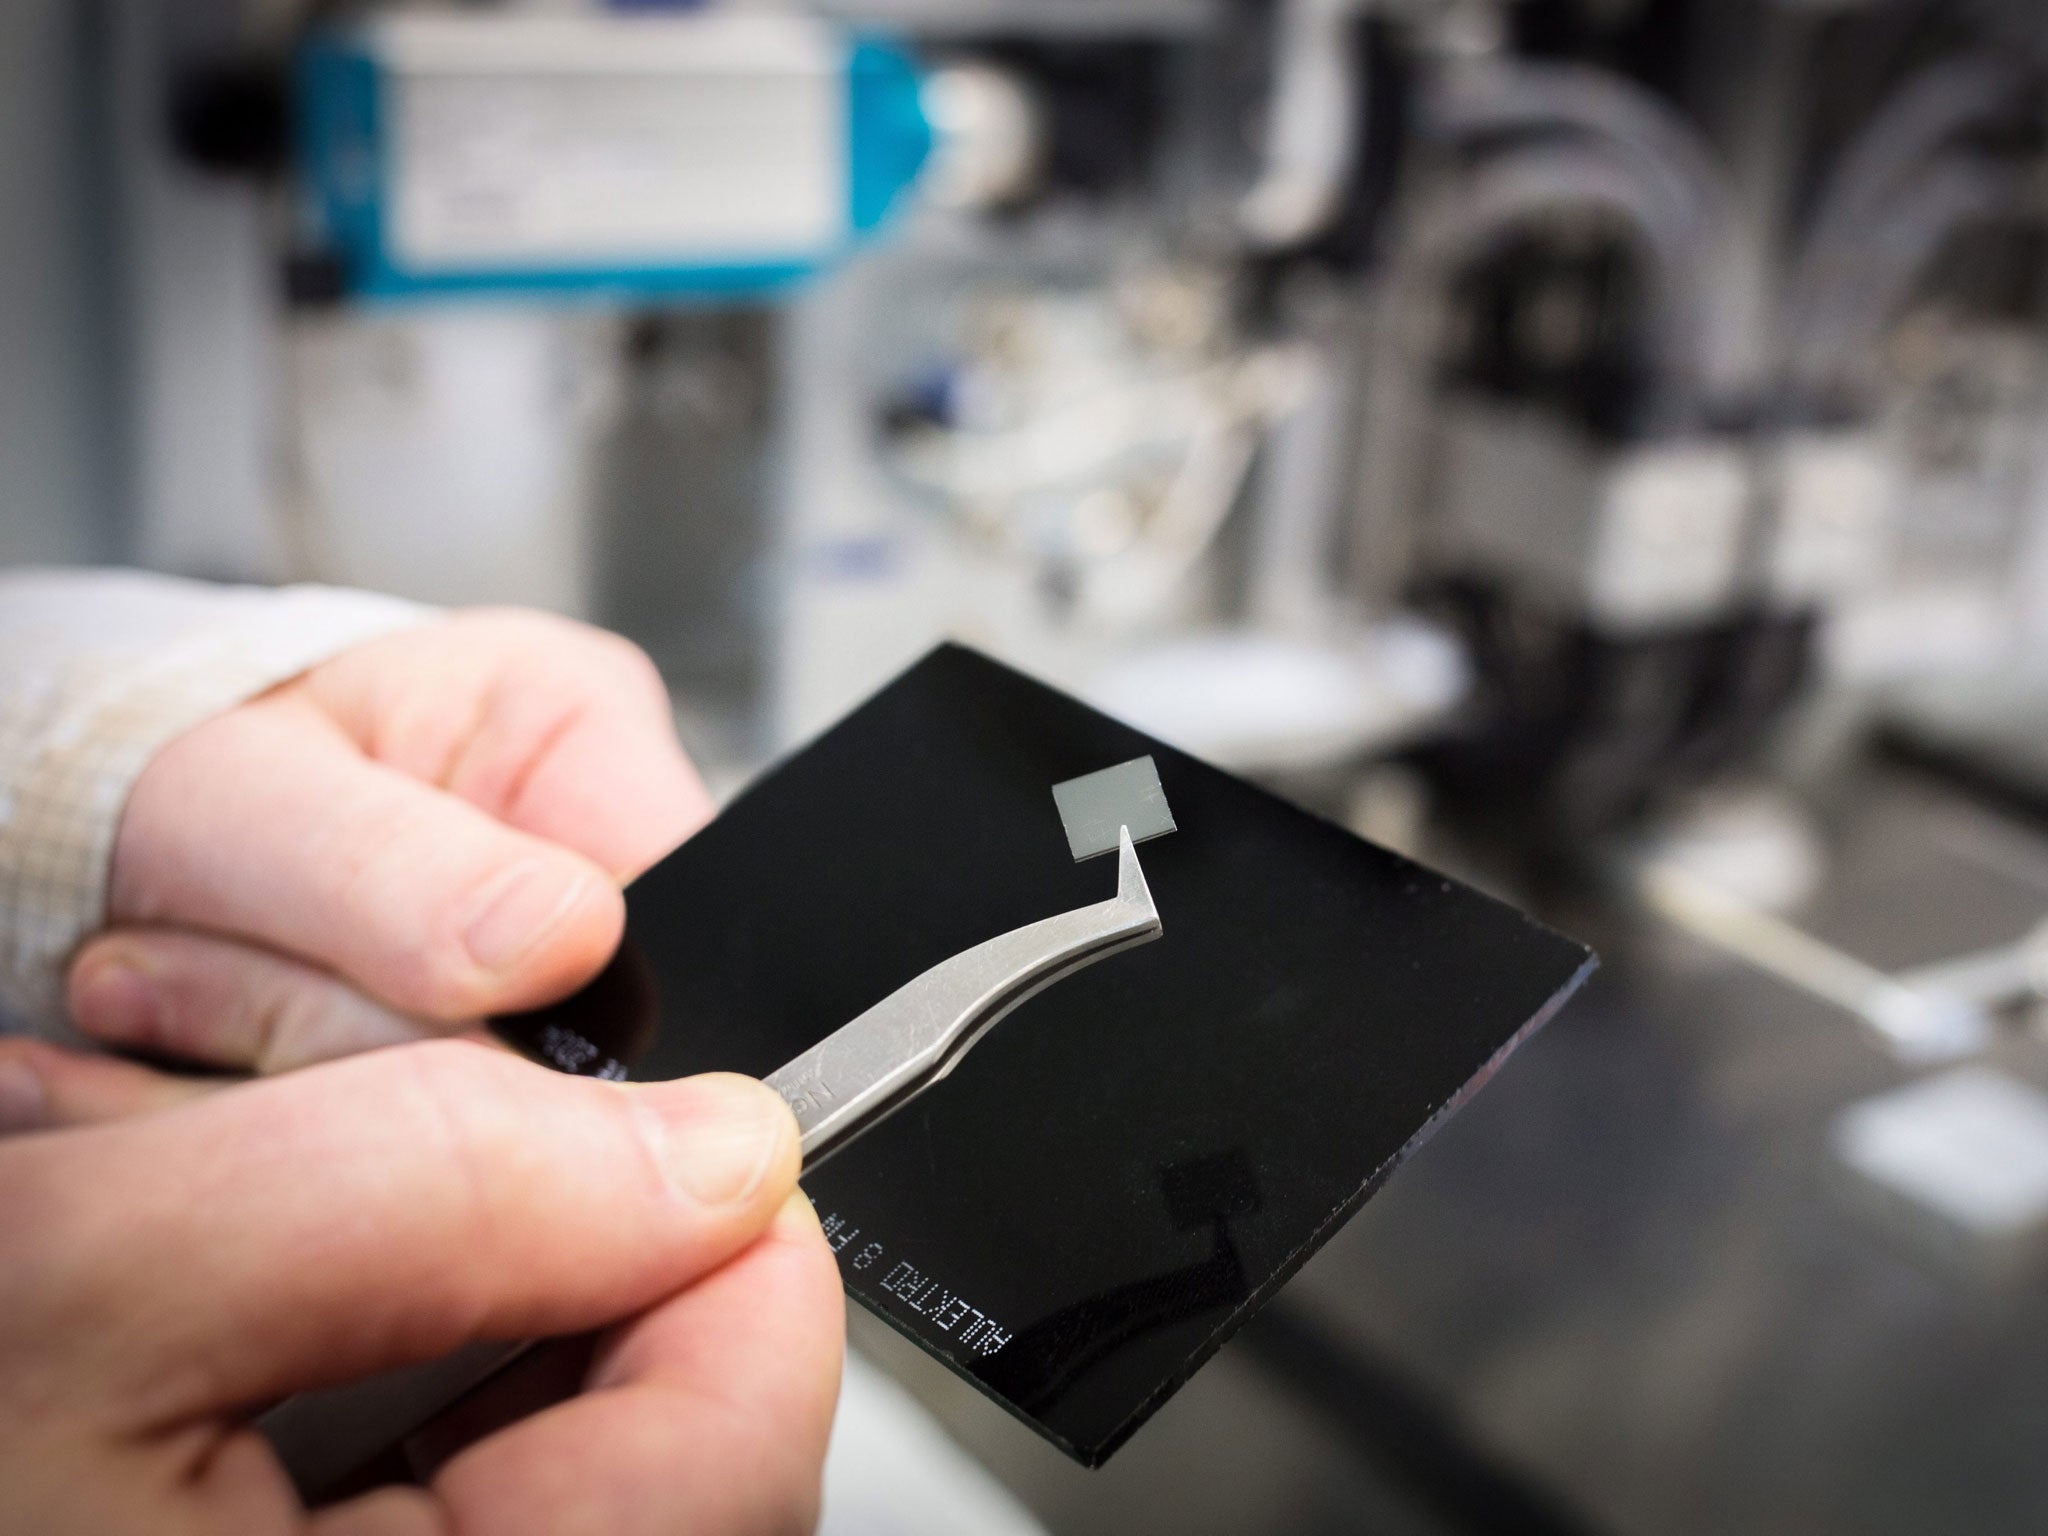 A graphene sample - the material continues to astonish scientists